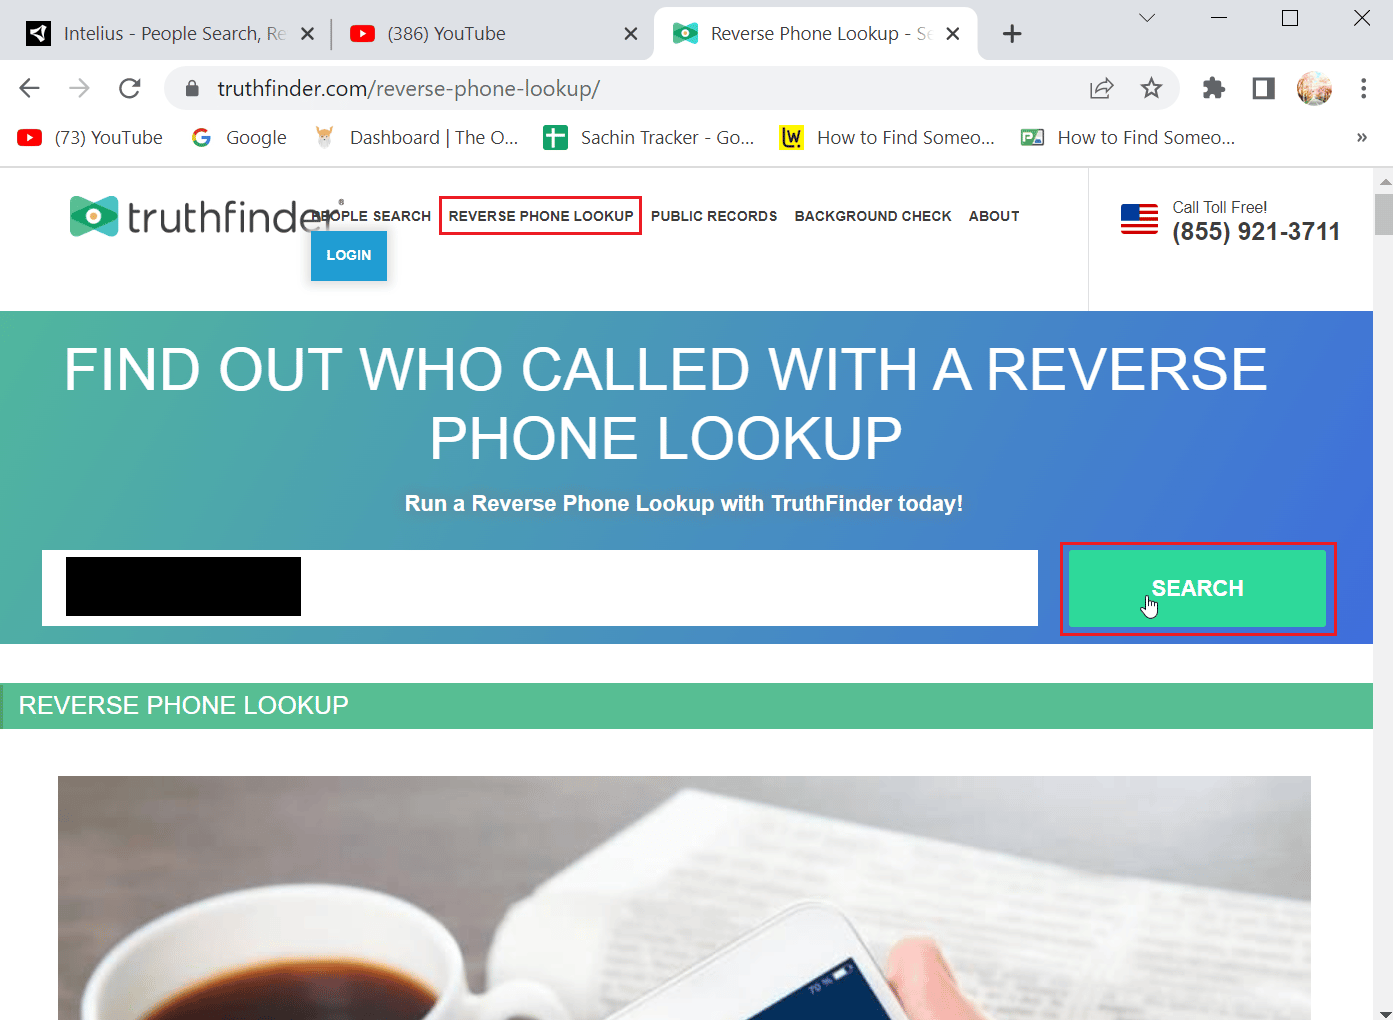 click on reverse phone lookup and enter the phone number and click search